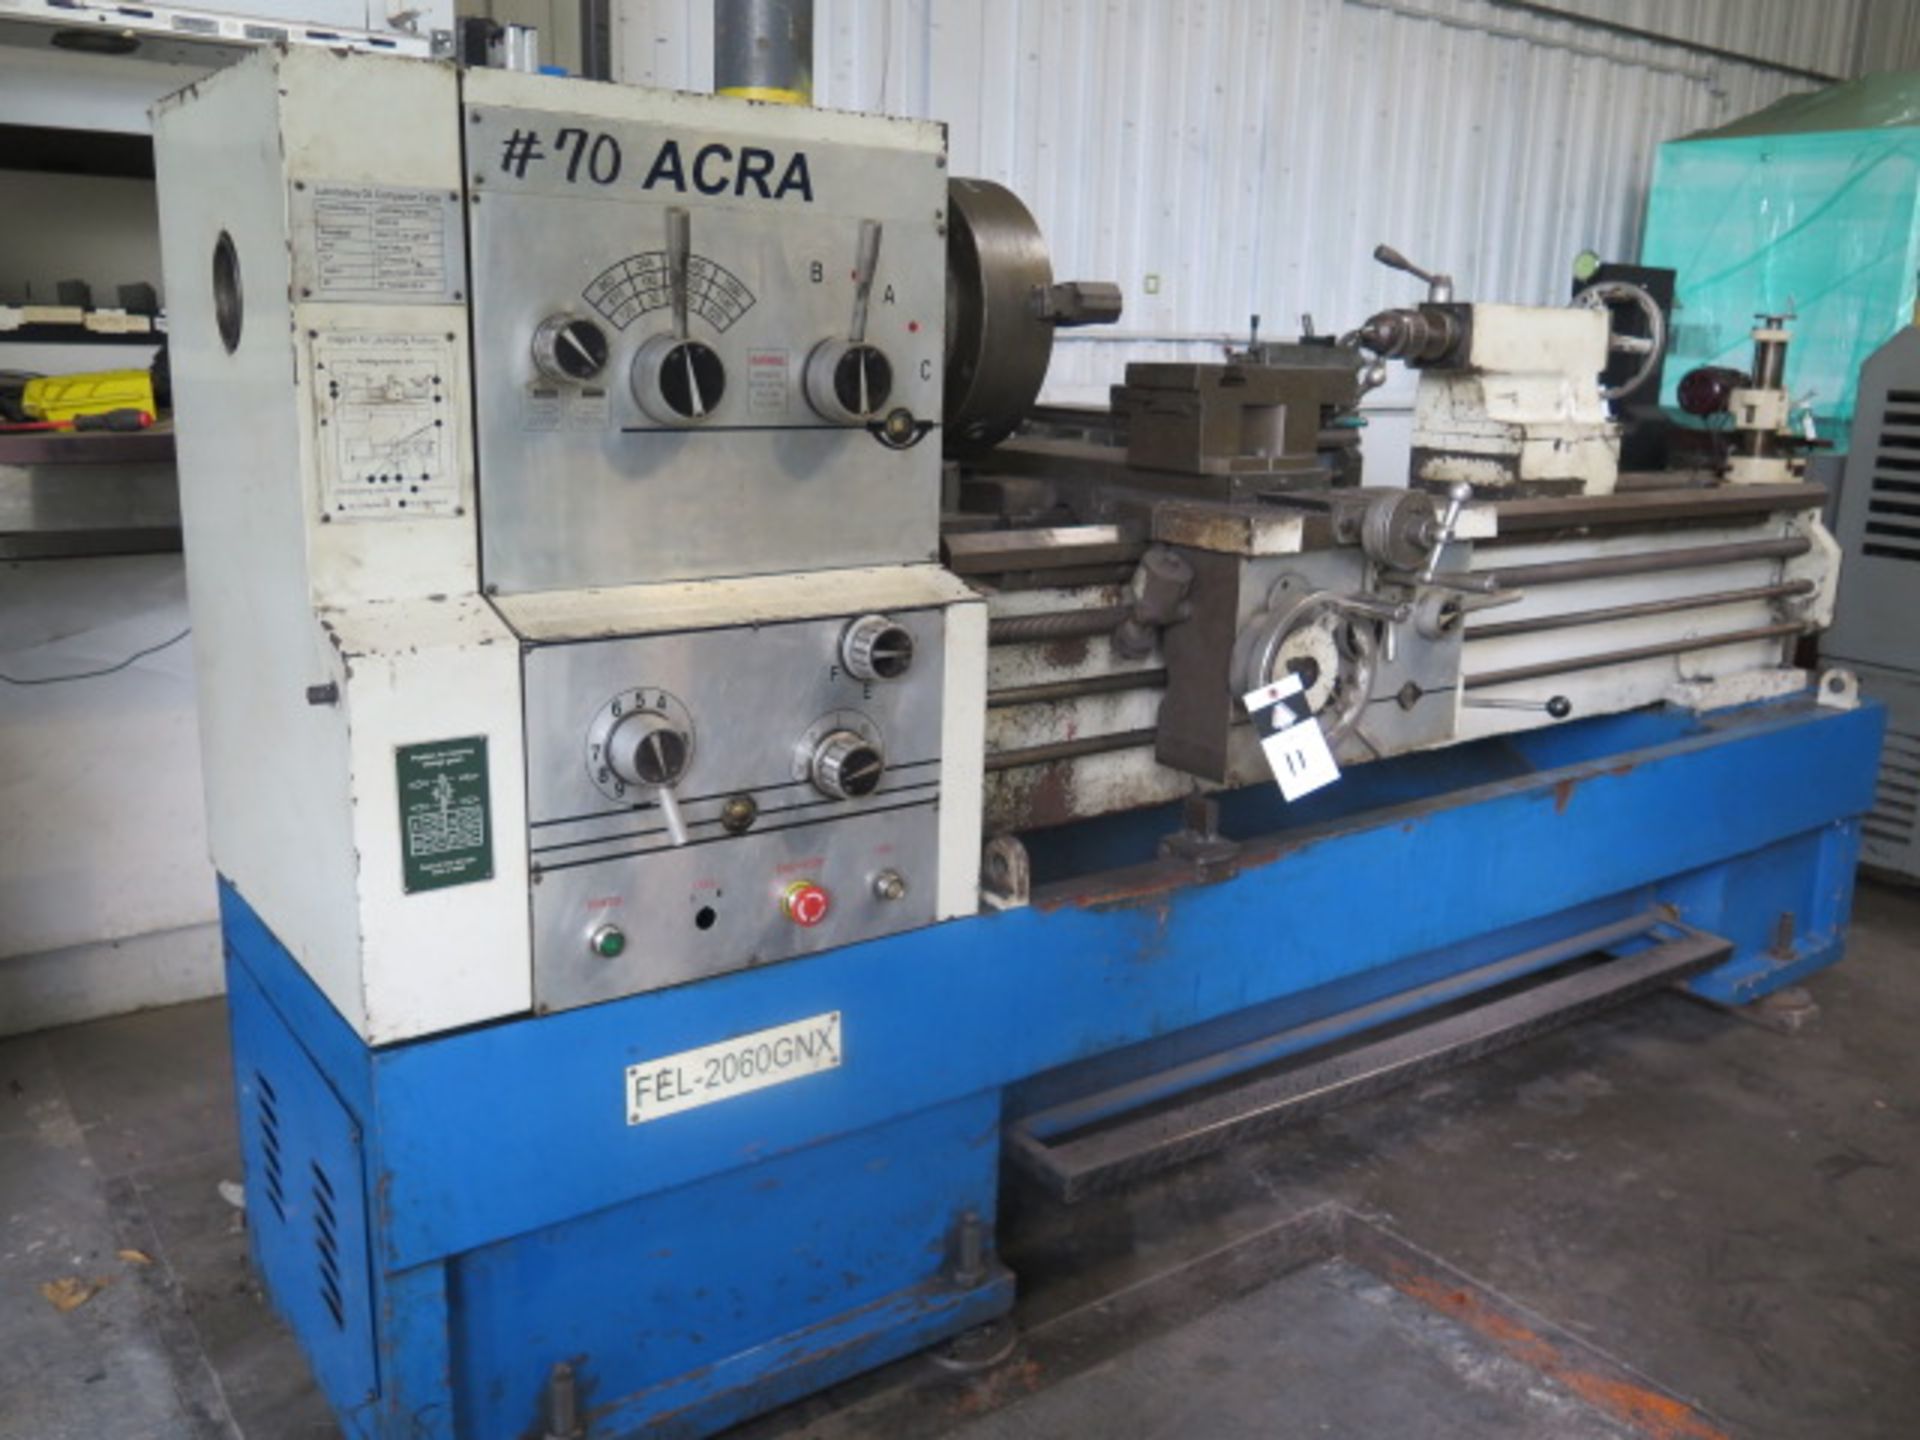 Acra FEL-2060GNX 20” x 60” Geared Head Gap Lathe w/ 32-1500 RPM, 3 1/8” Thru Spindle Bore,SOLD AS IS - Image 2 of 16